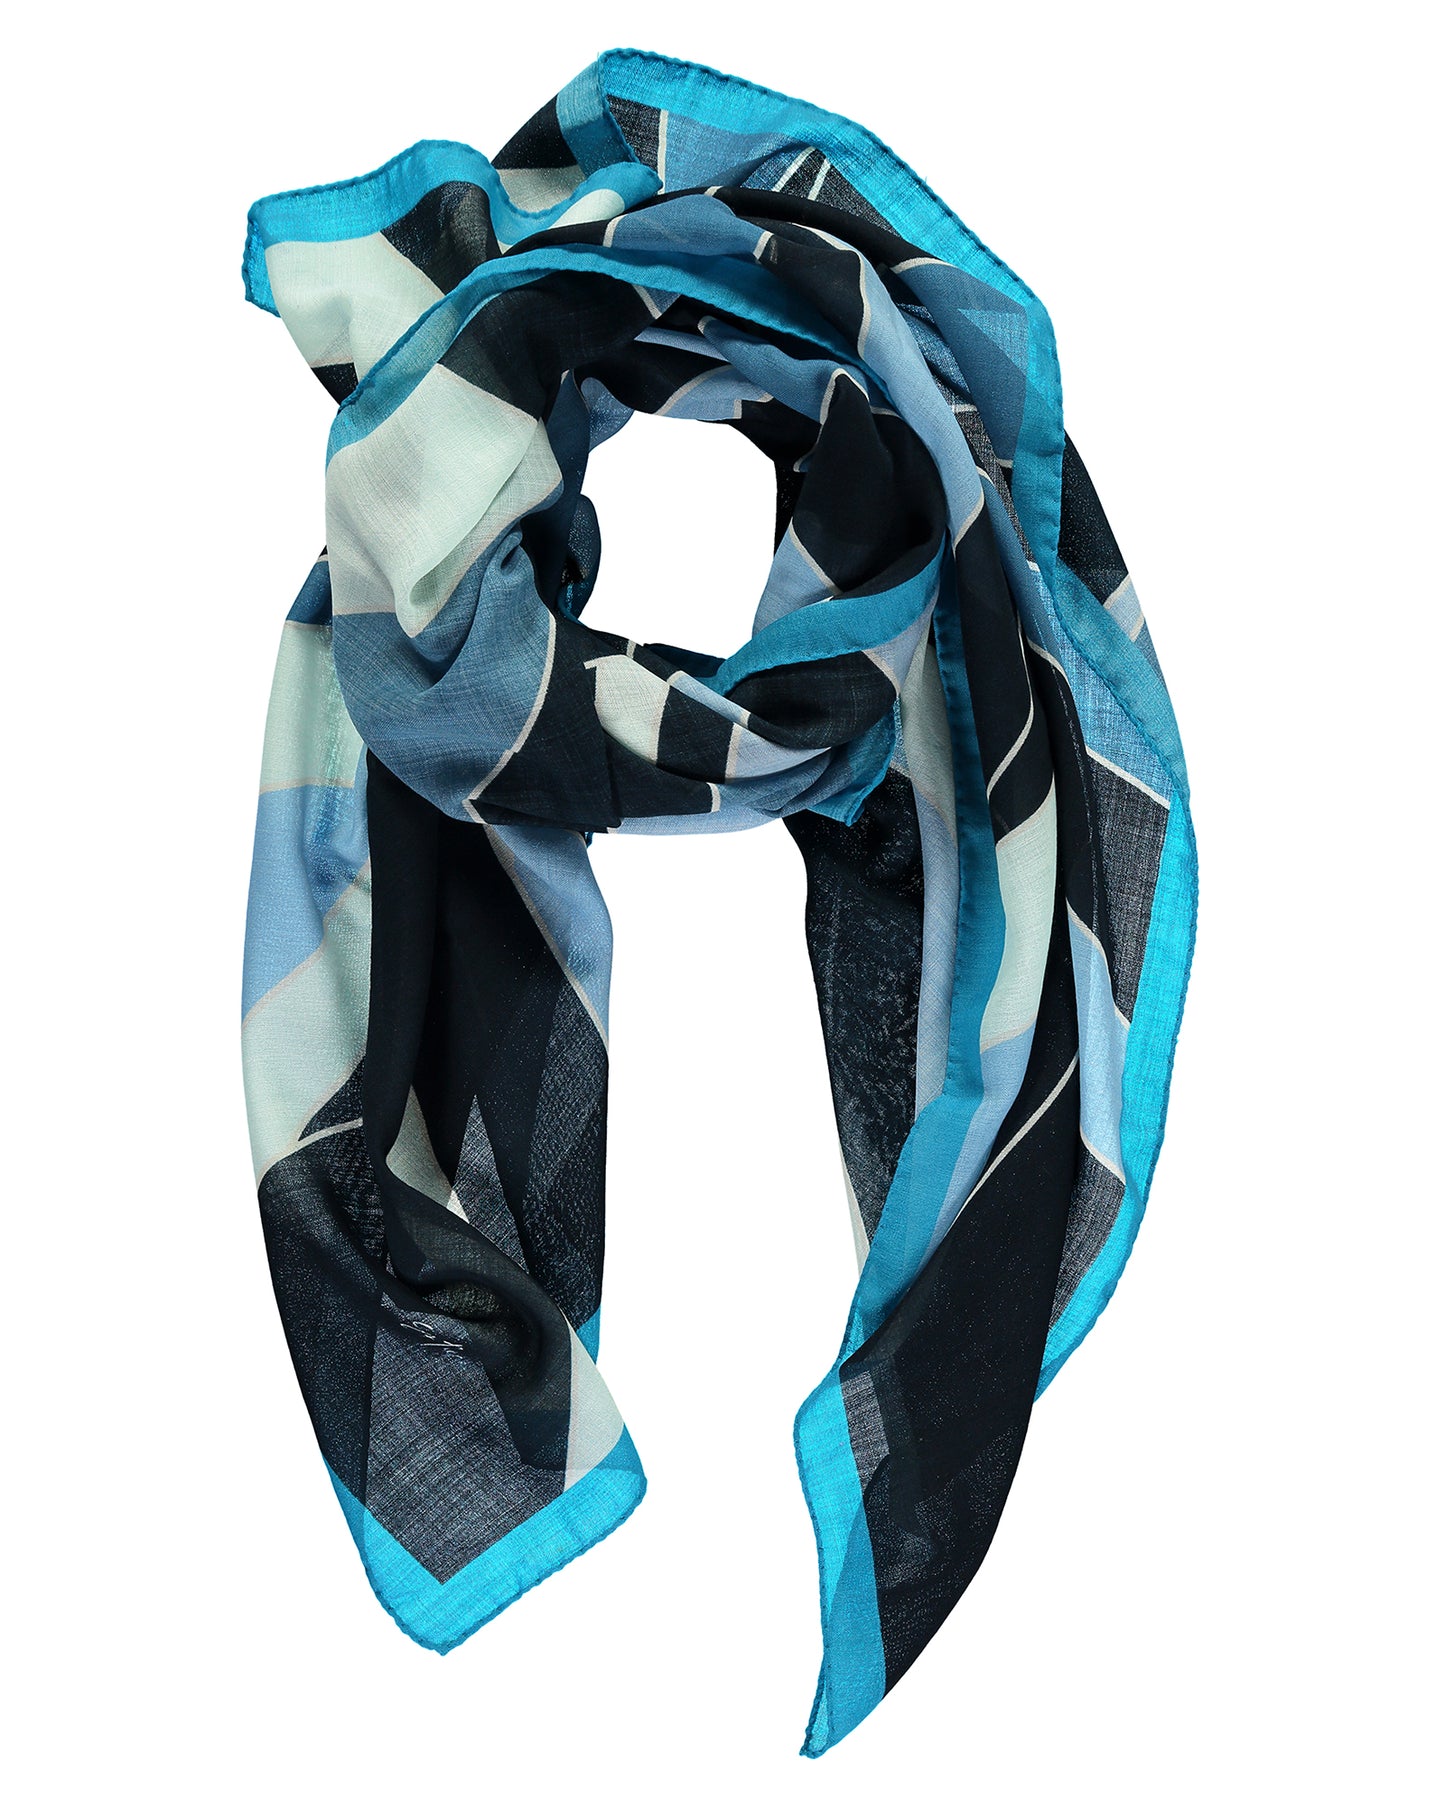 DEX Large Square Wool & Cashmere Scarf